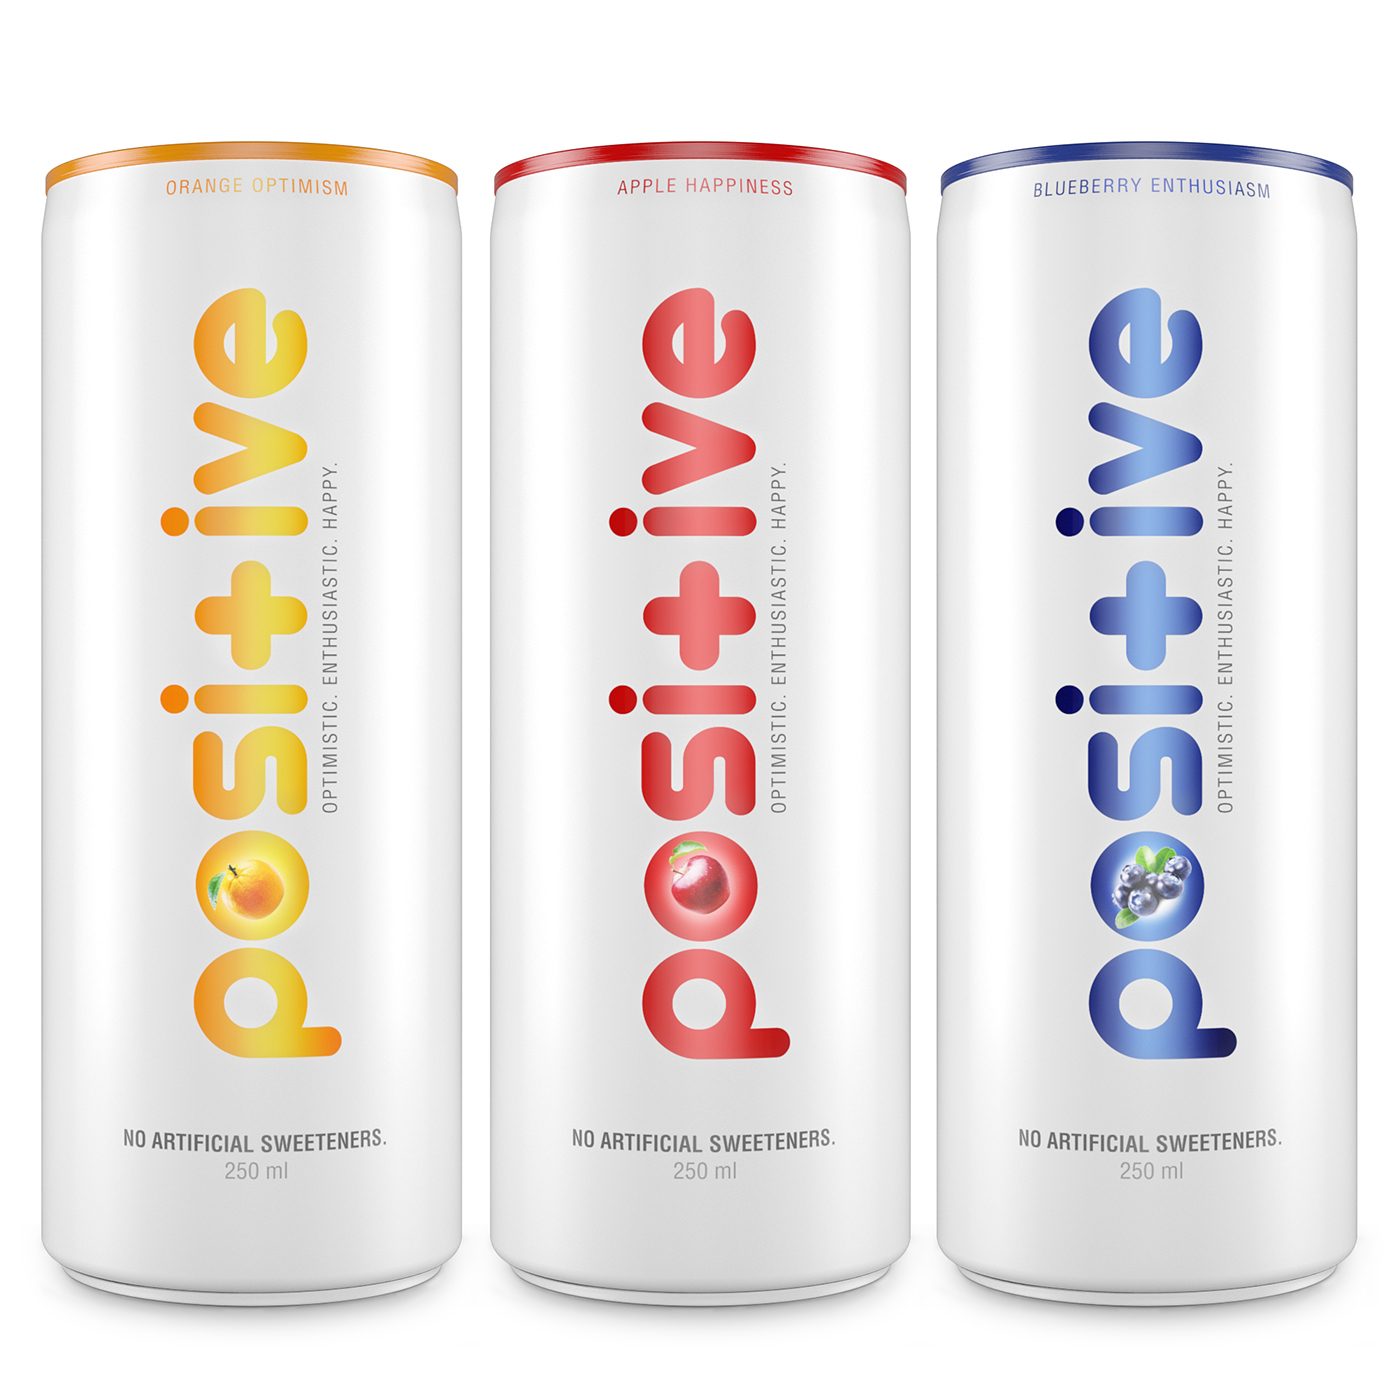 Positive energy drink CGI 3D Promotional campaign Imagery